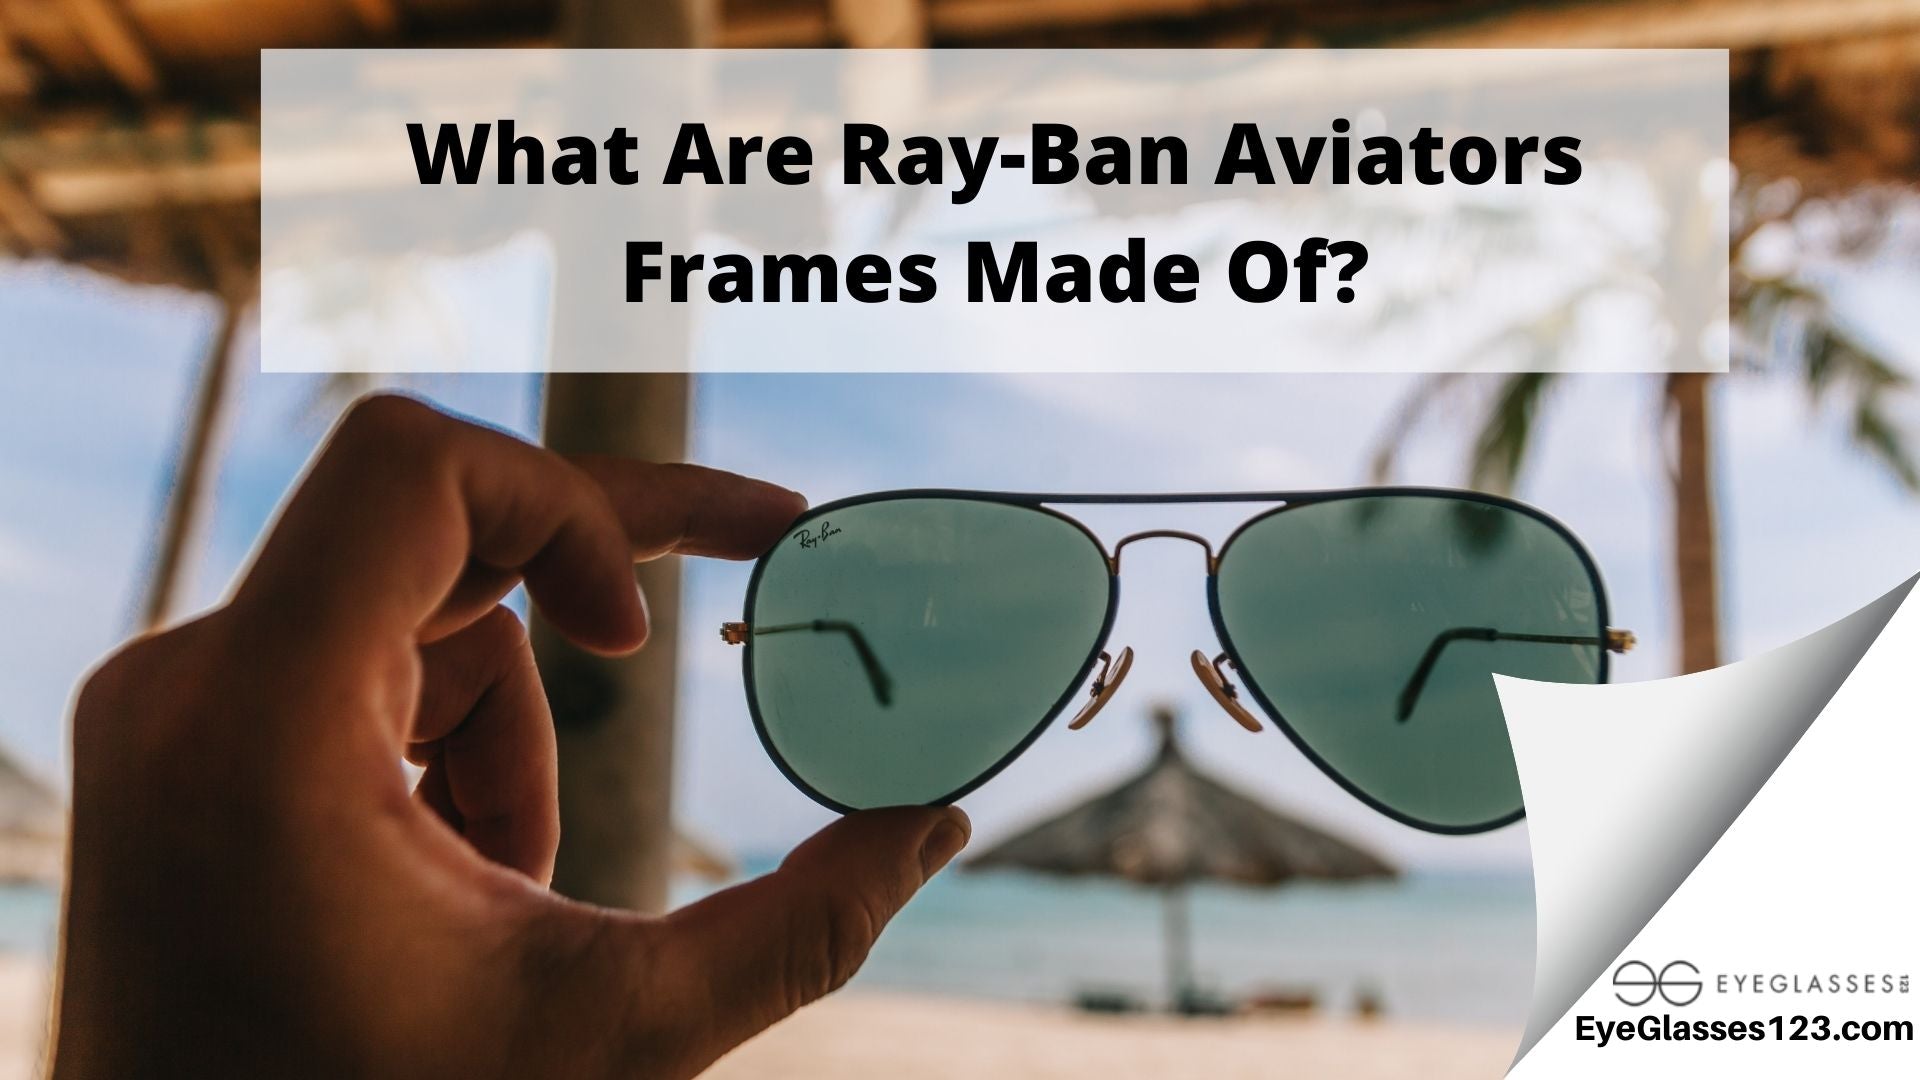 What Are Ray-Ban Aviators Frames Made Of?